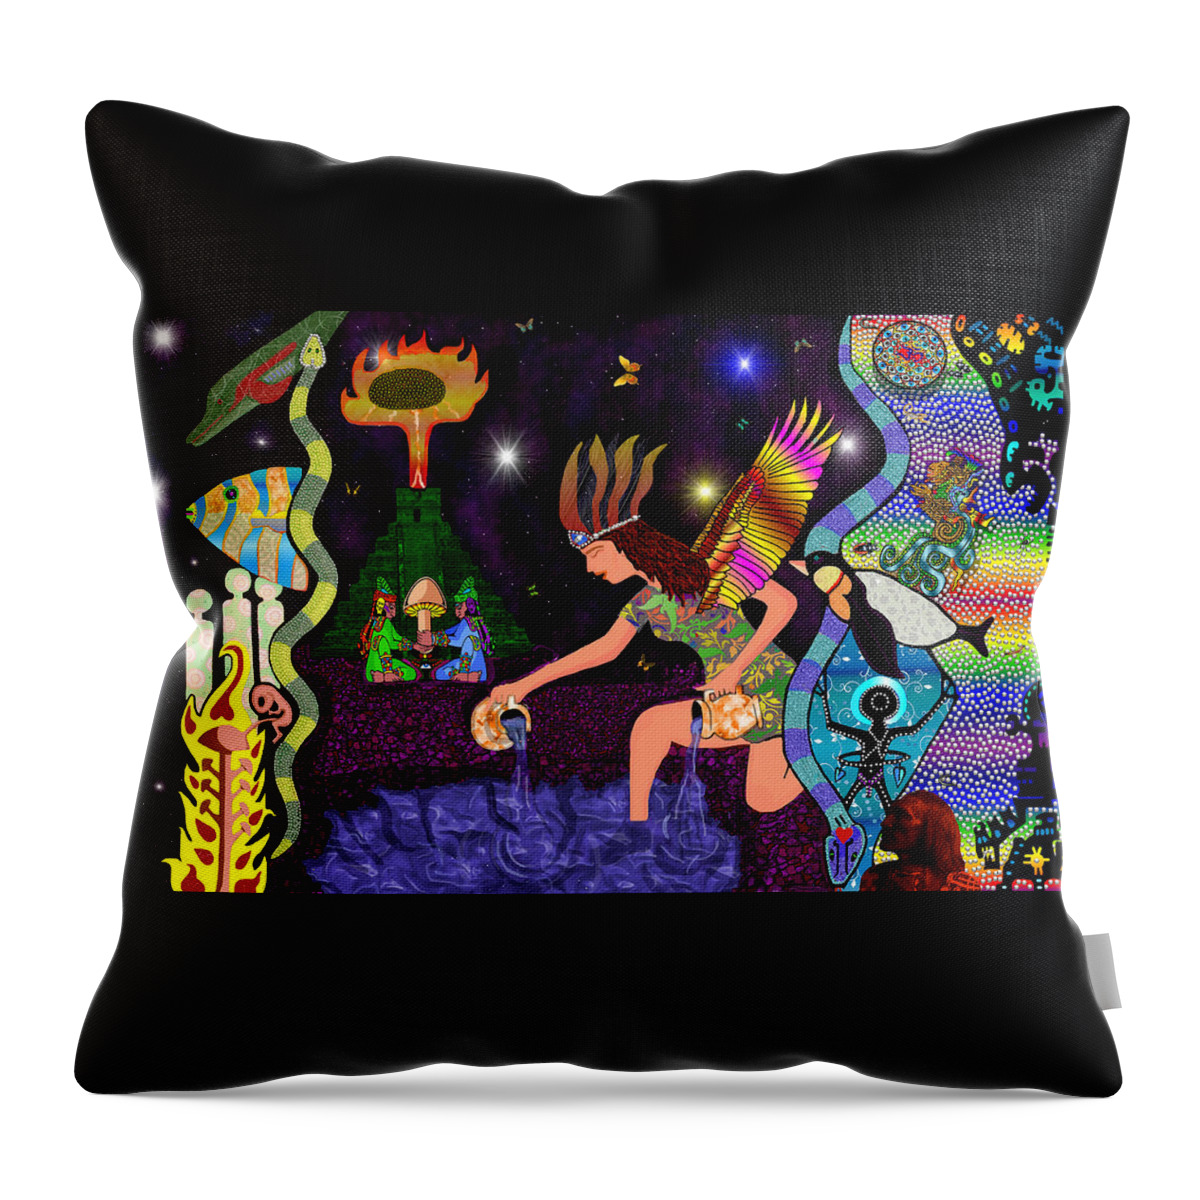 Dreamtime Throw Pillow featuring the digital art Space between Stars by Myztico Campo